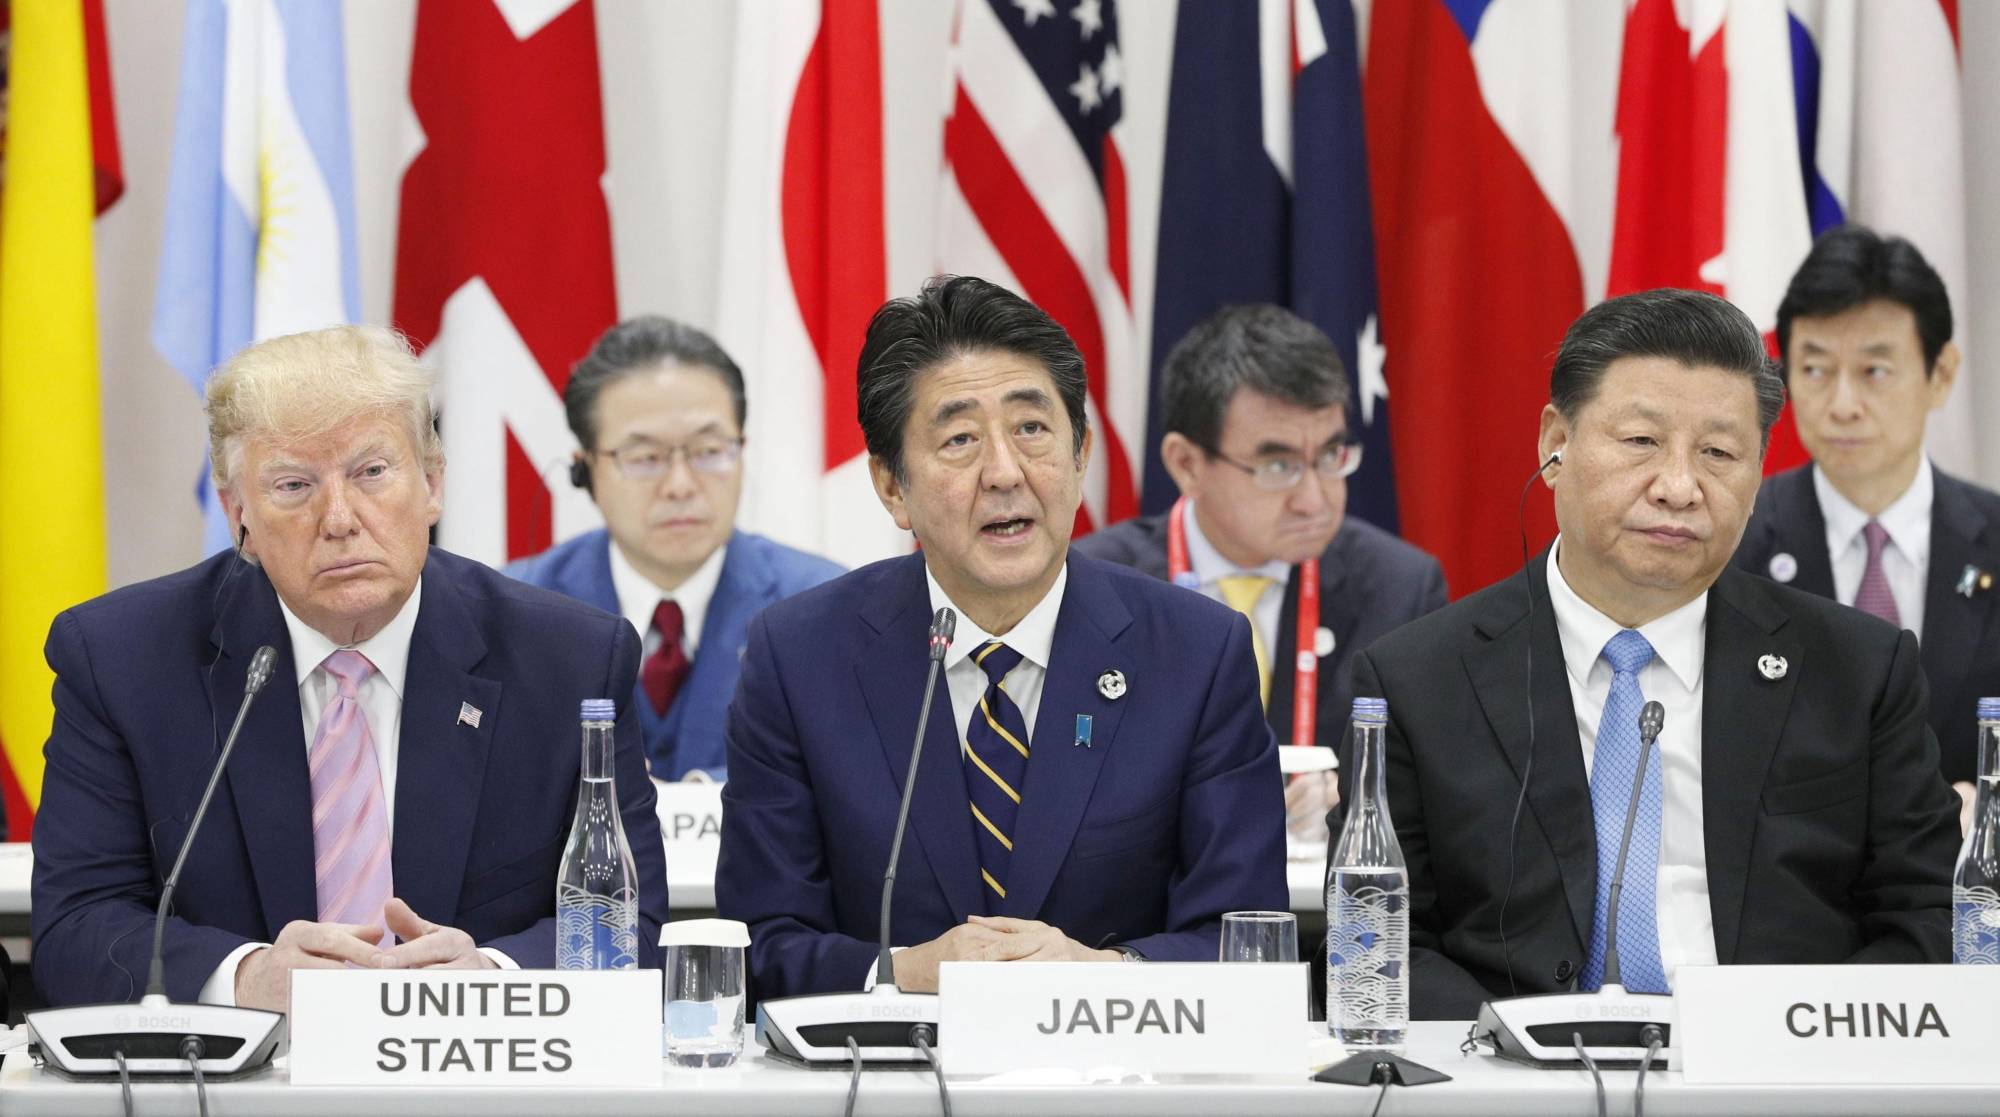 The 'new Cold War' developing between the United States under President Donald Trump and China under President Xi Jinping is presenting problems for Prime Minister Shinzo Abe regarding alliances and security. | KYODO